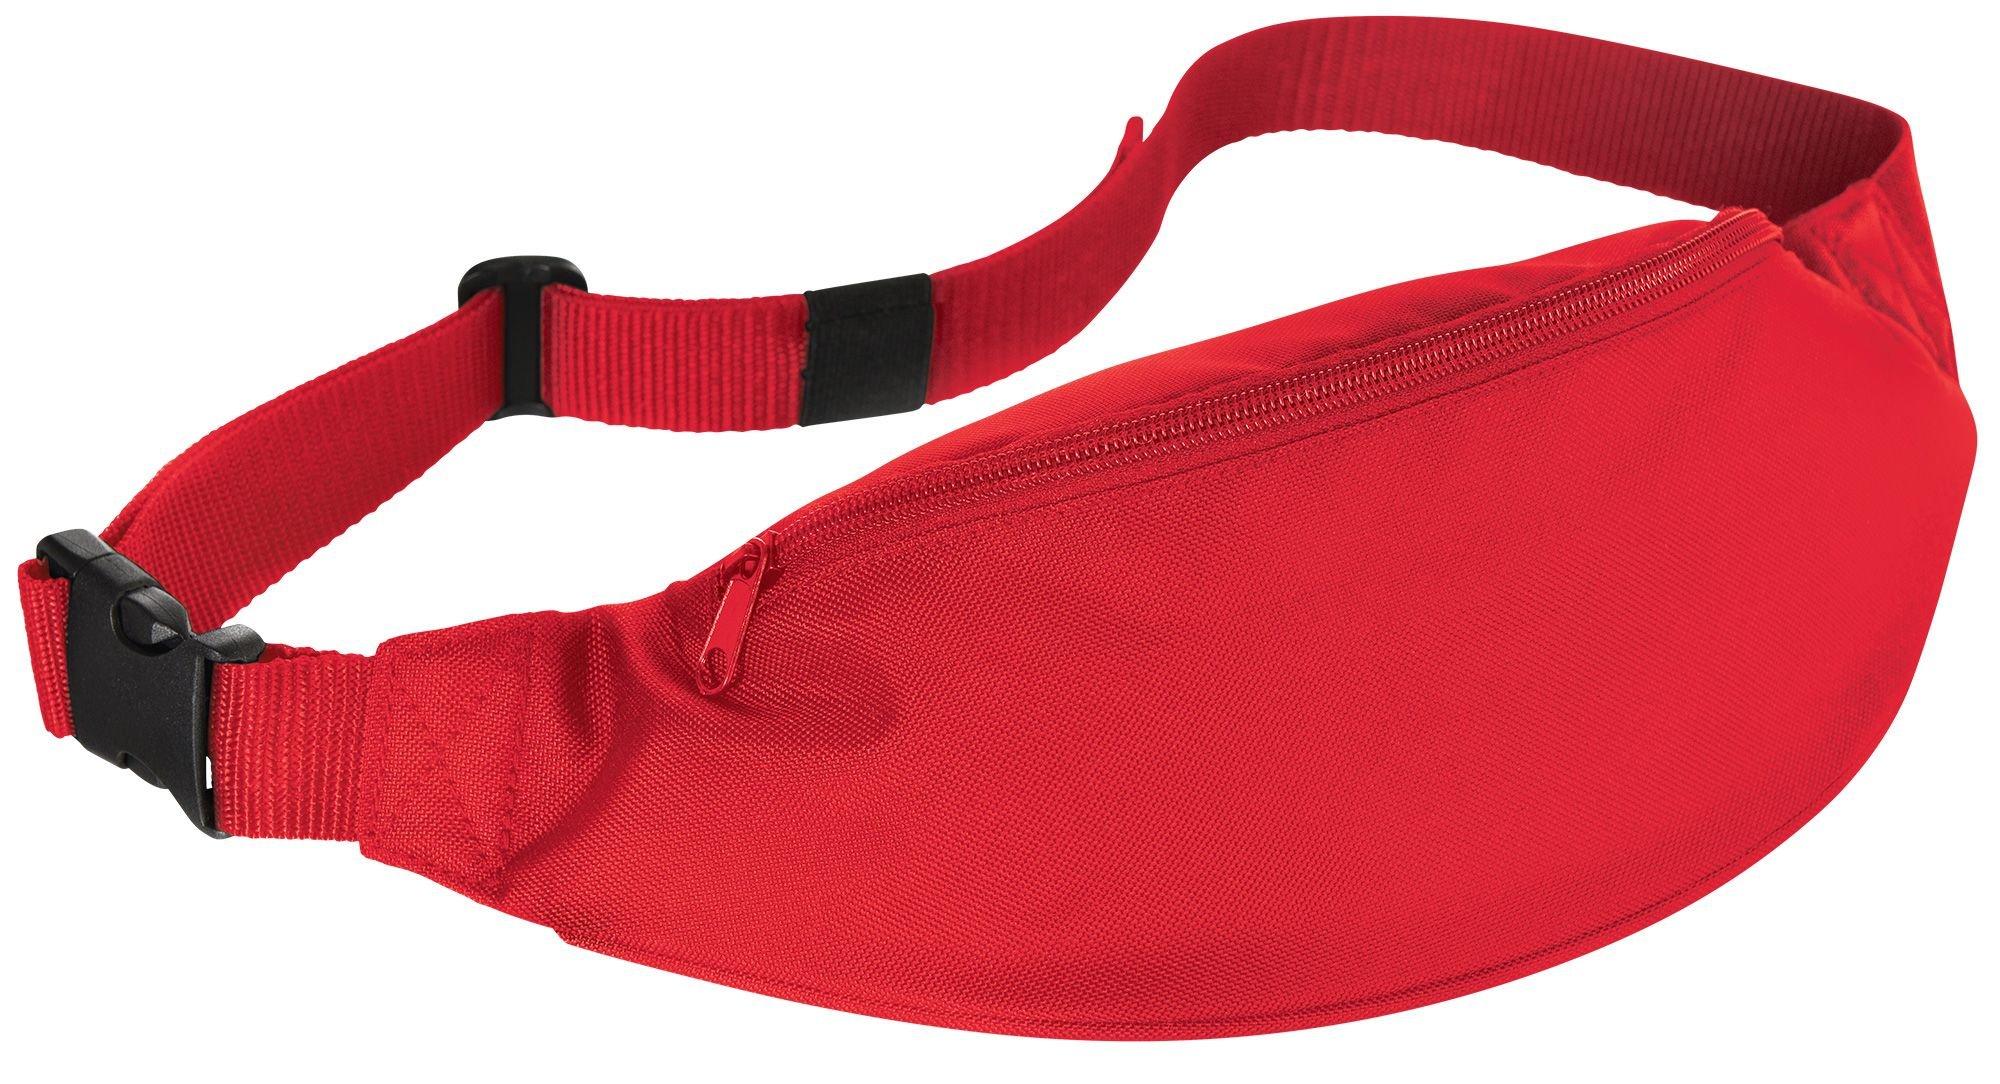 Accessories, Red Designer Fanny Pack